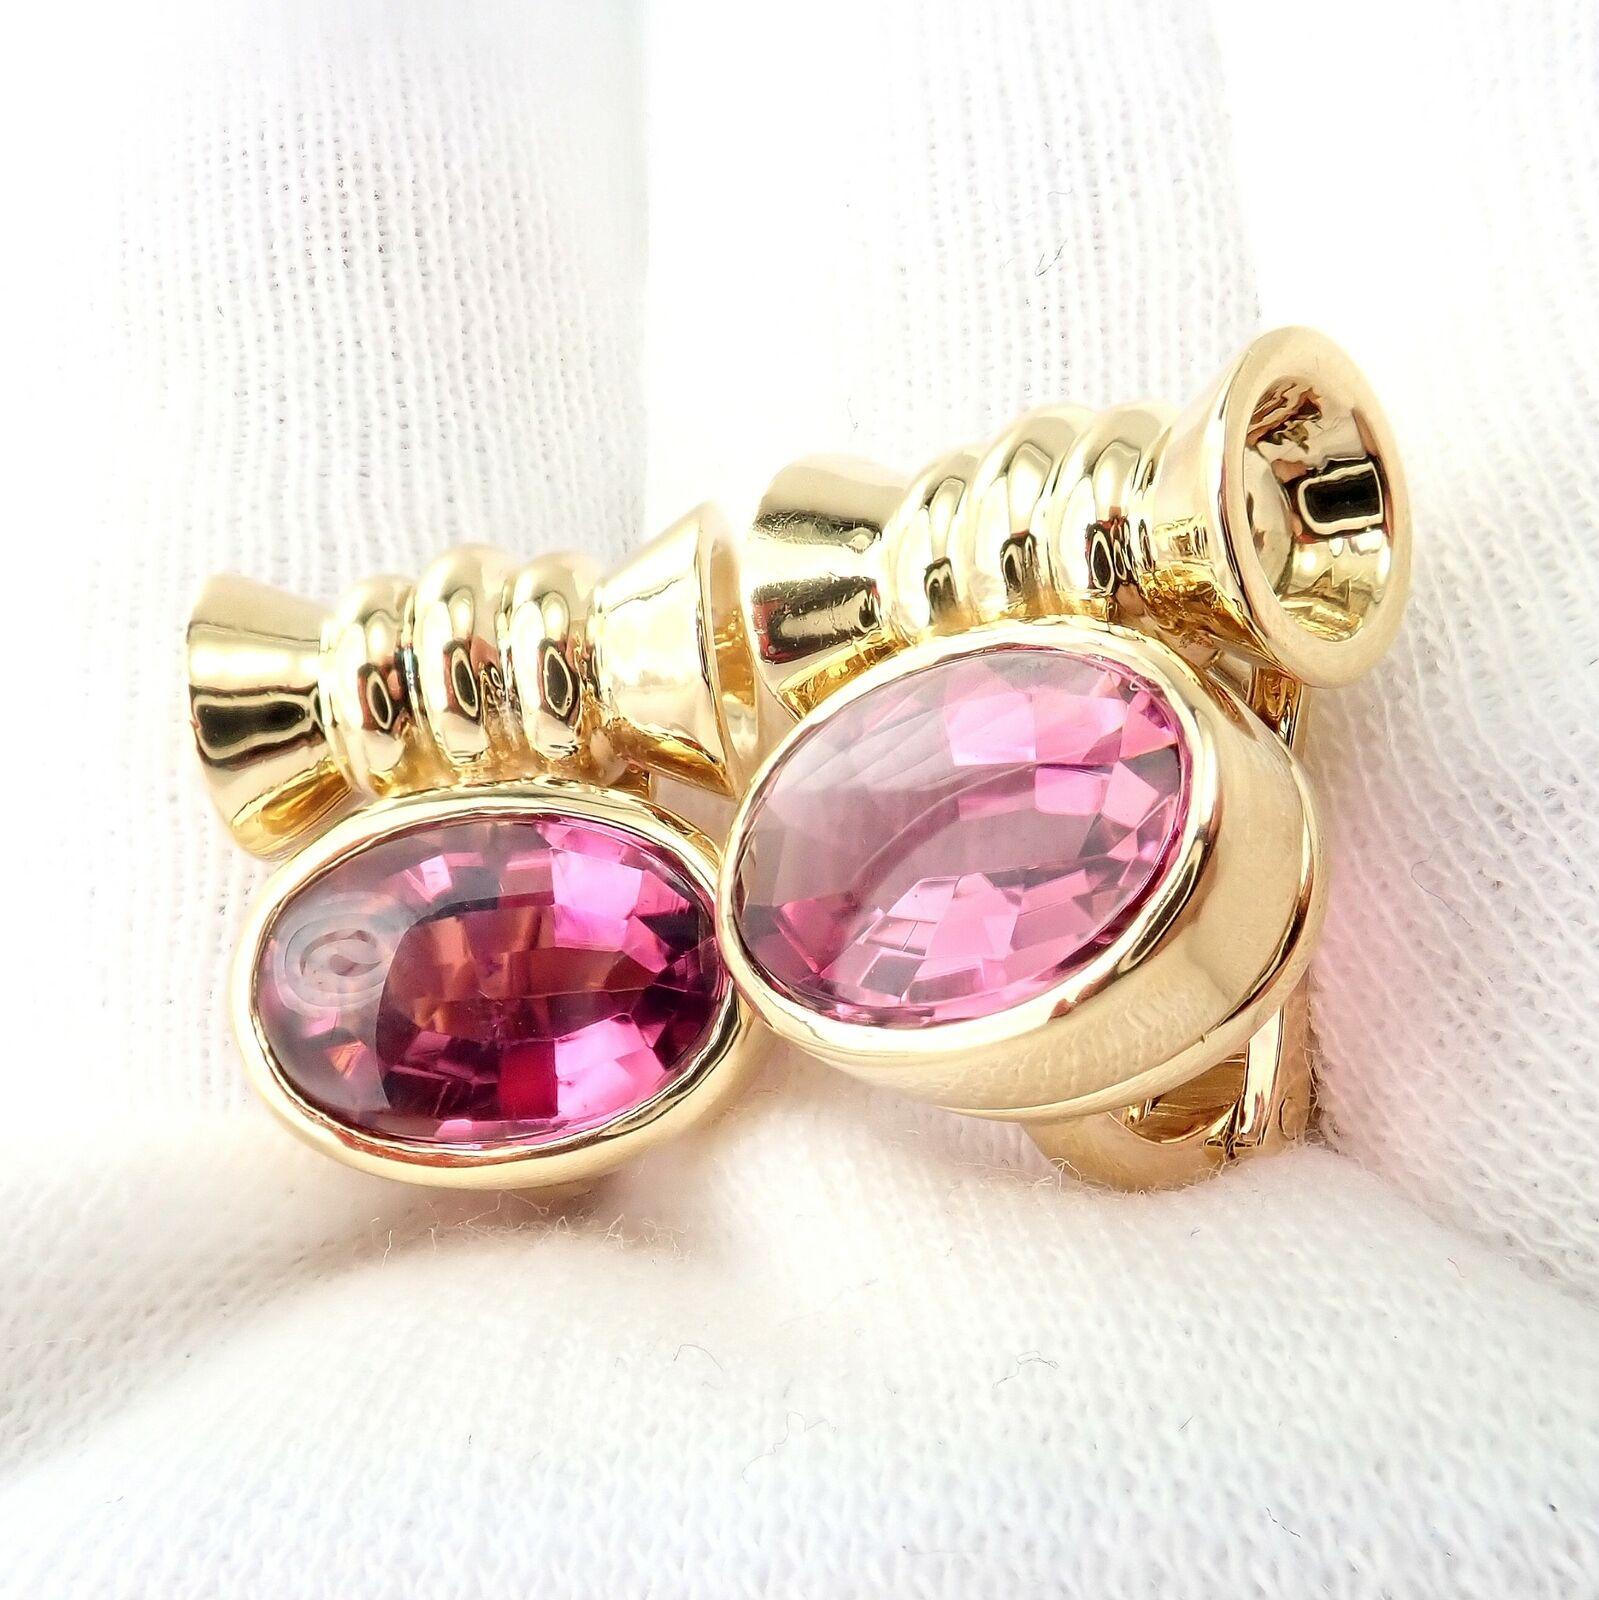 Bulgari Bvlgari Pink Tourmaline Yellow Gold Earrings In Excellent Condition For Sale In Holland, PA